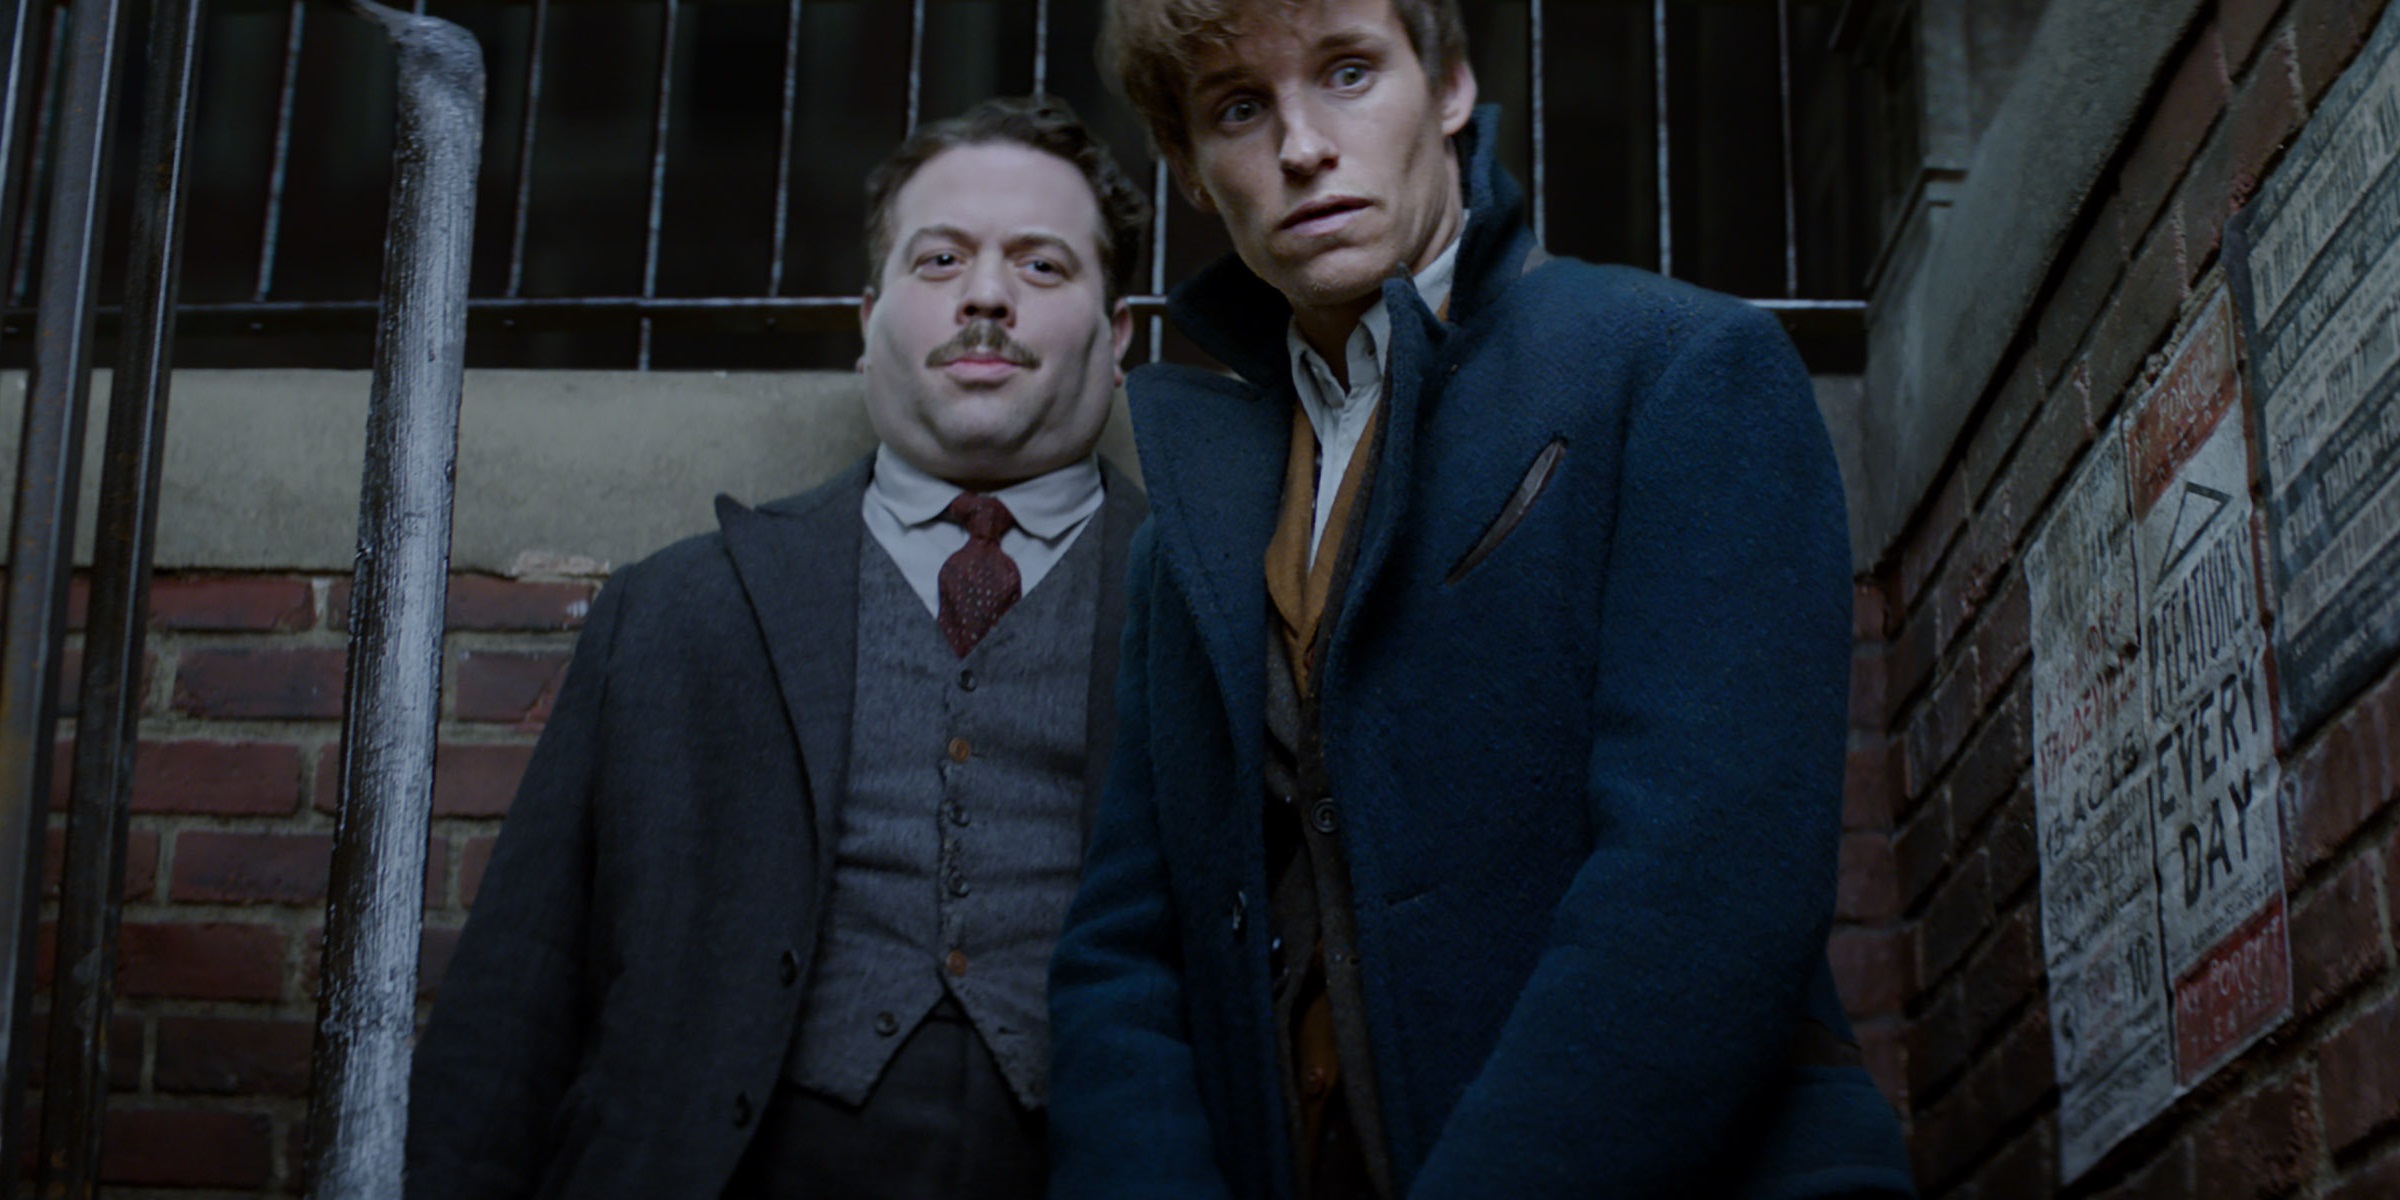 download the last version for apple Fantastic Beasts and Where to Find Them